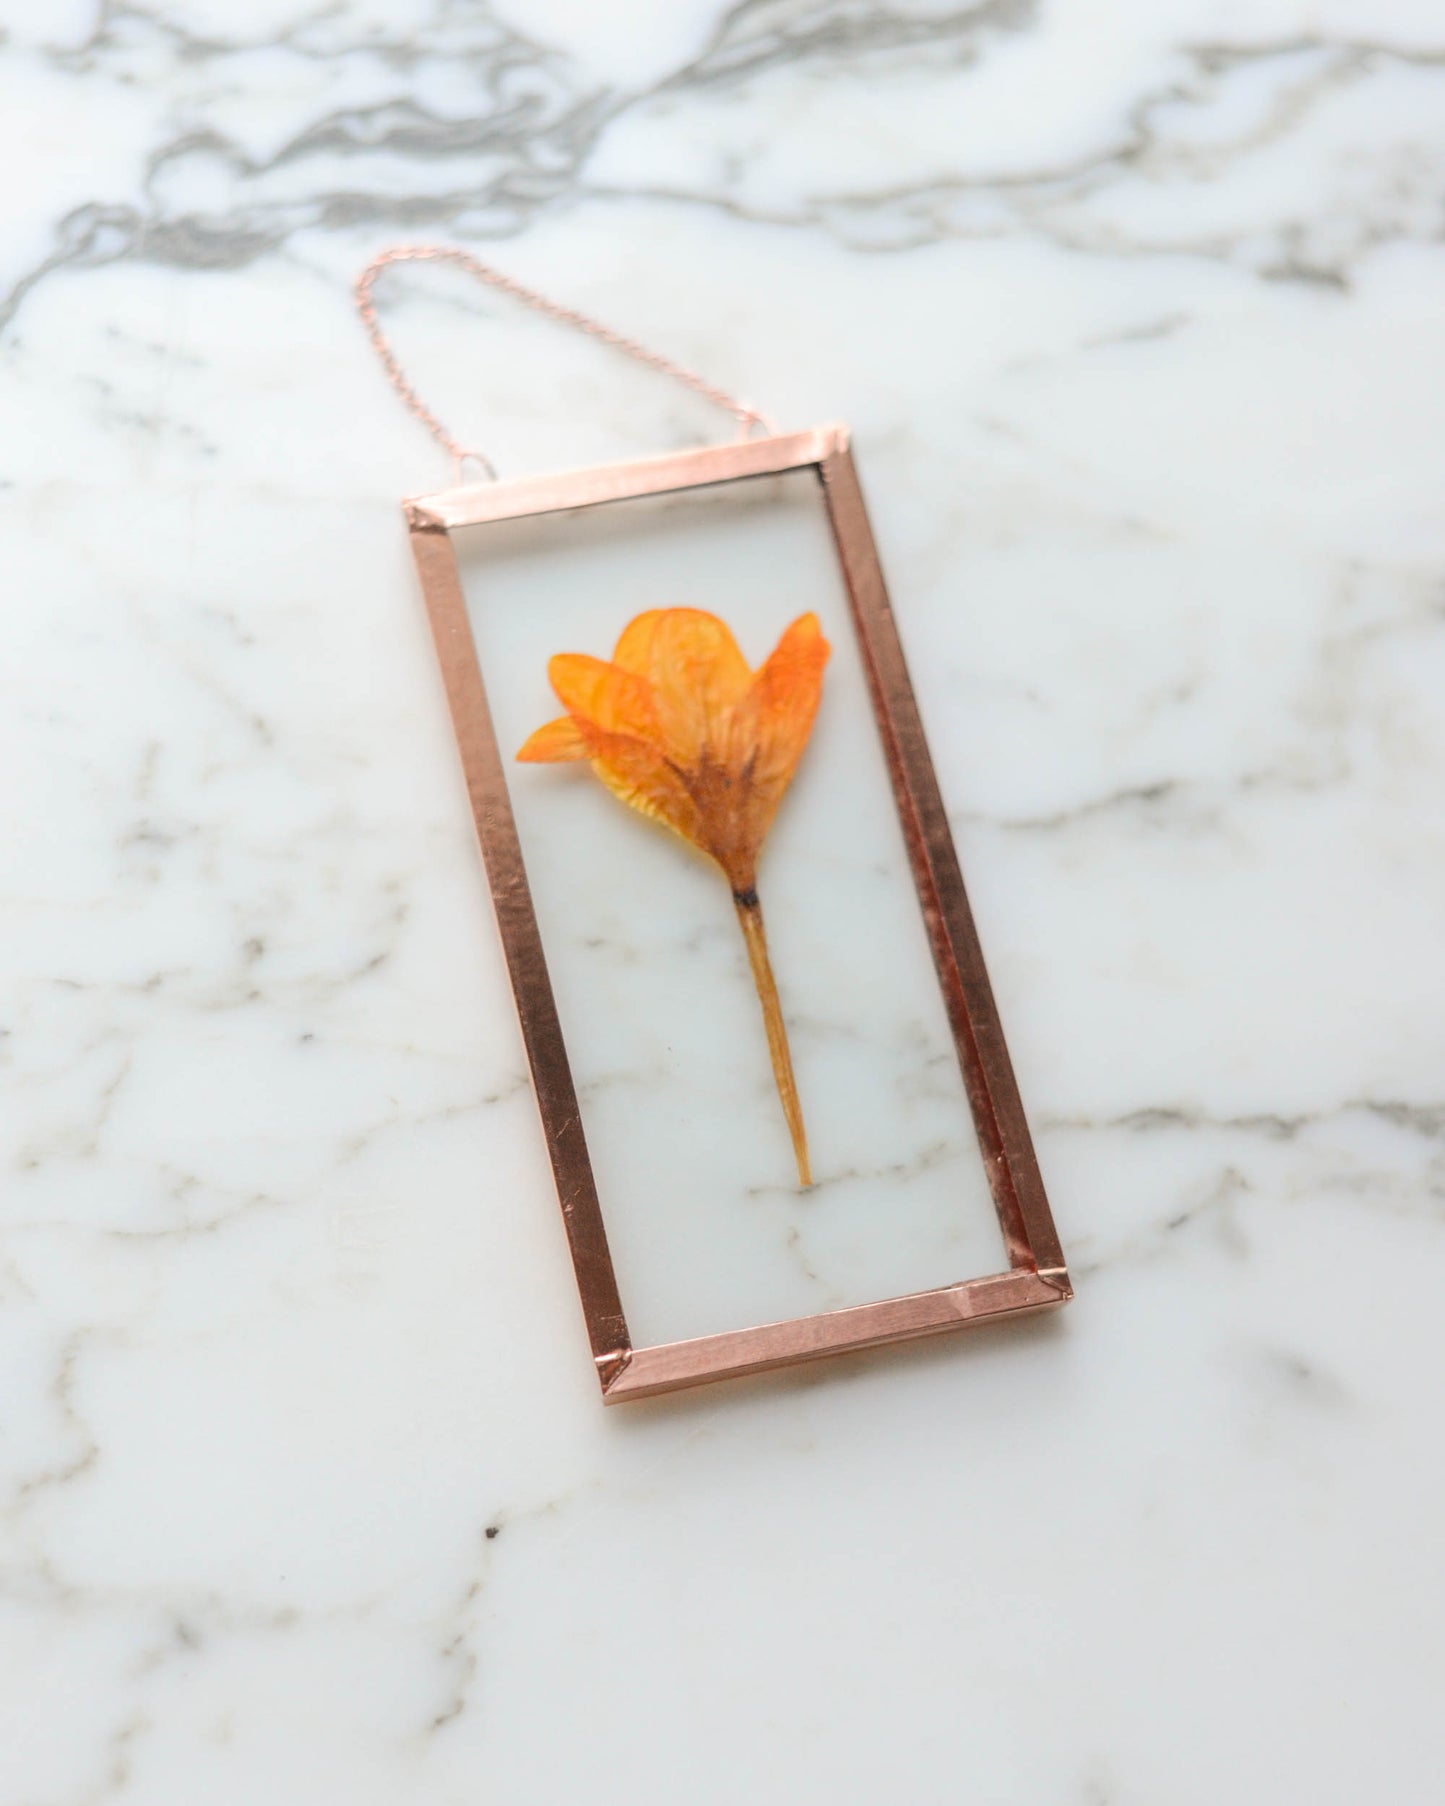 Golden Crocus- Small Glass and Copper Wall Hanging